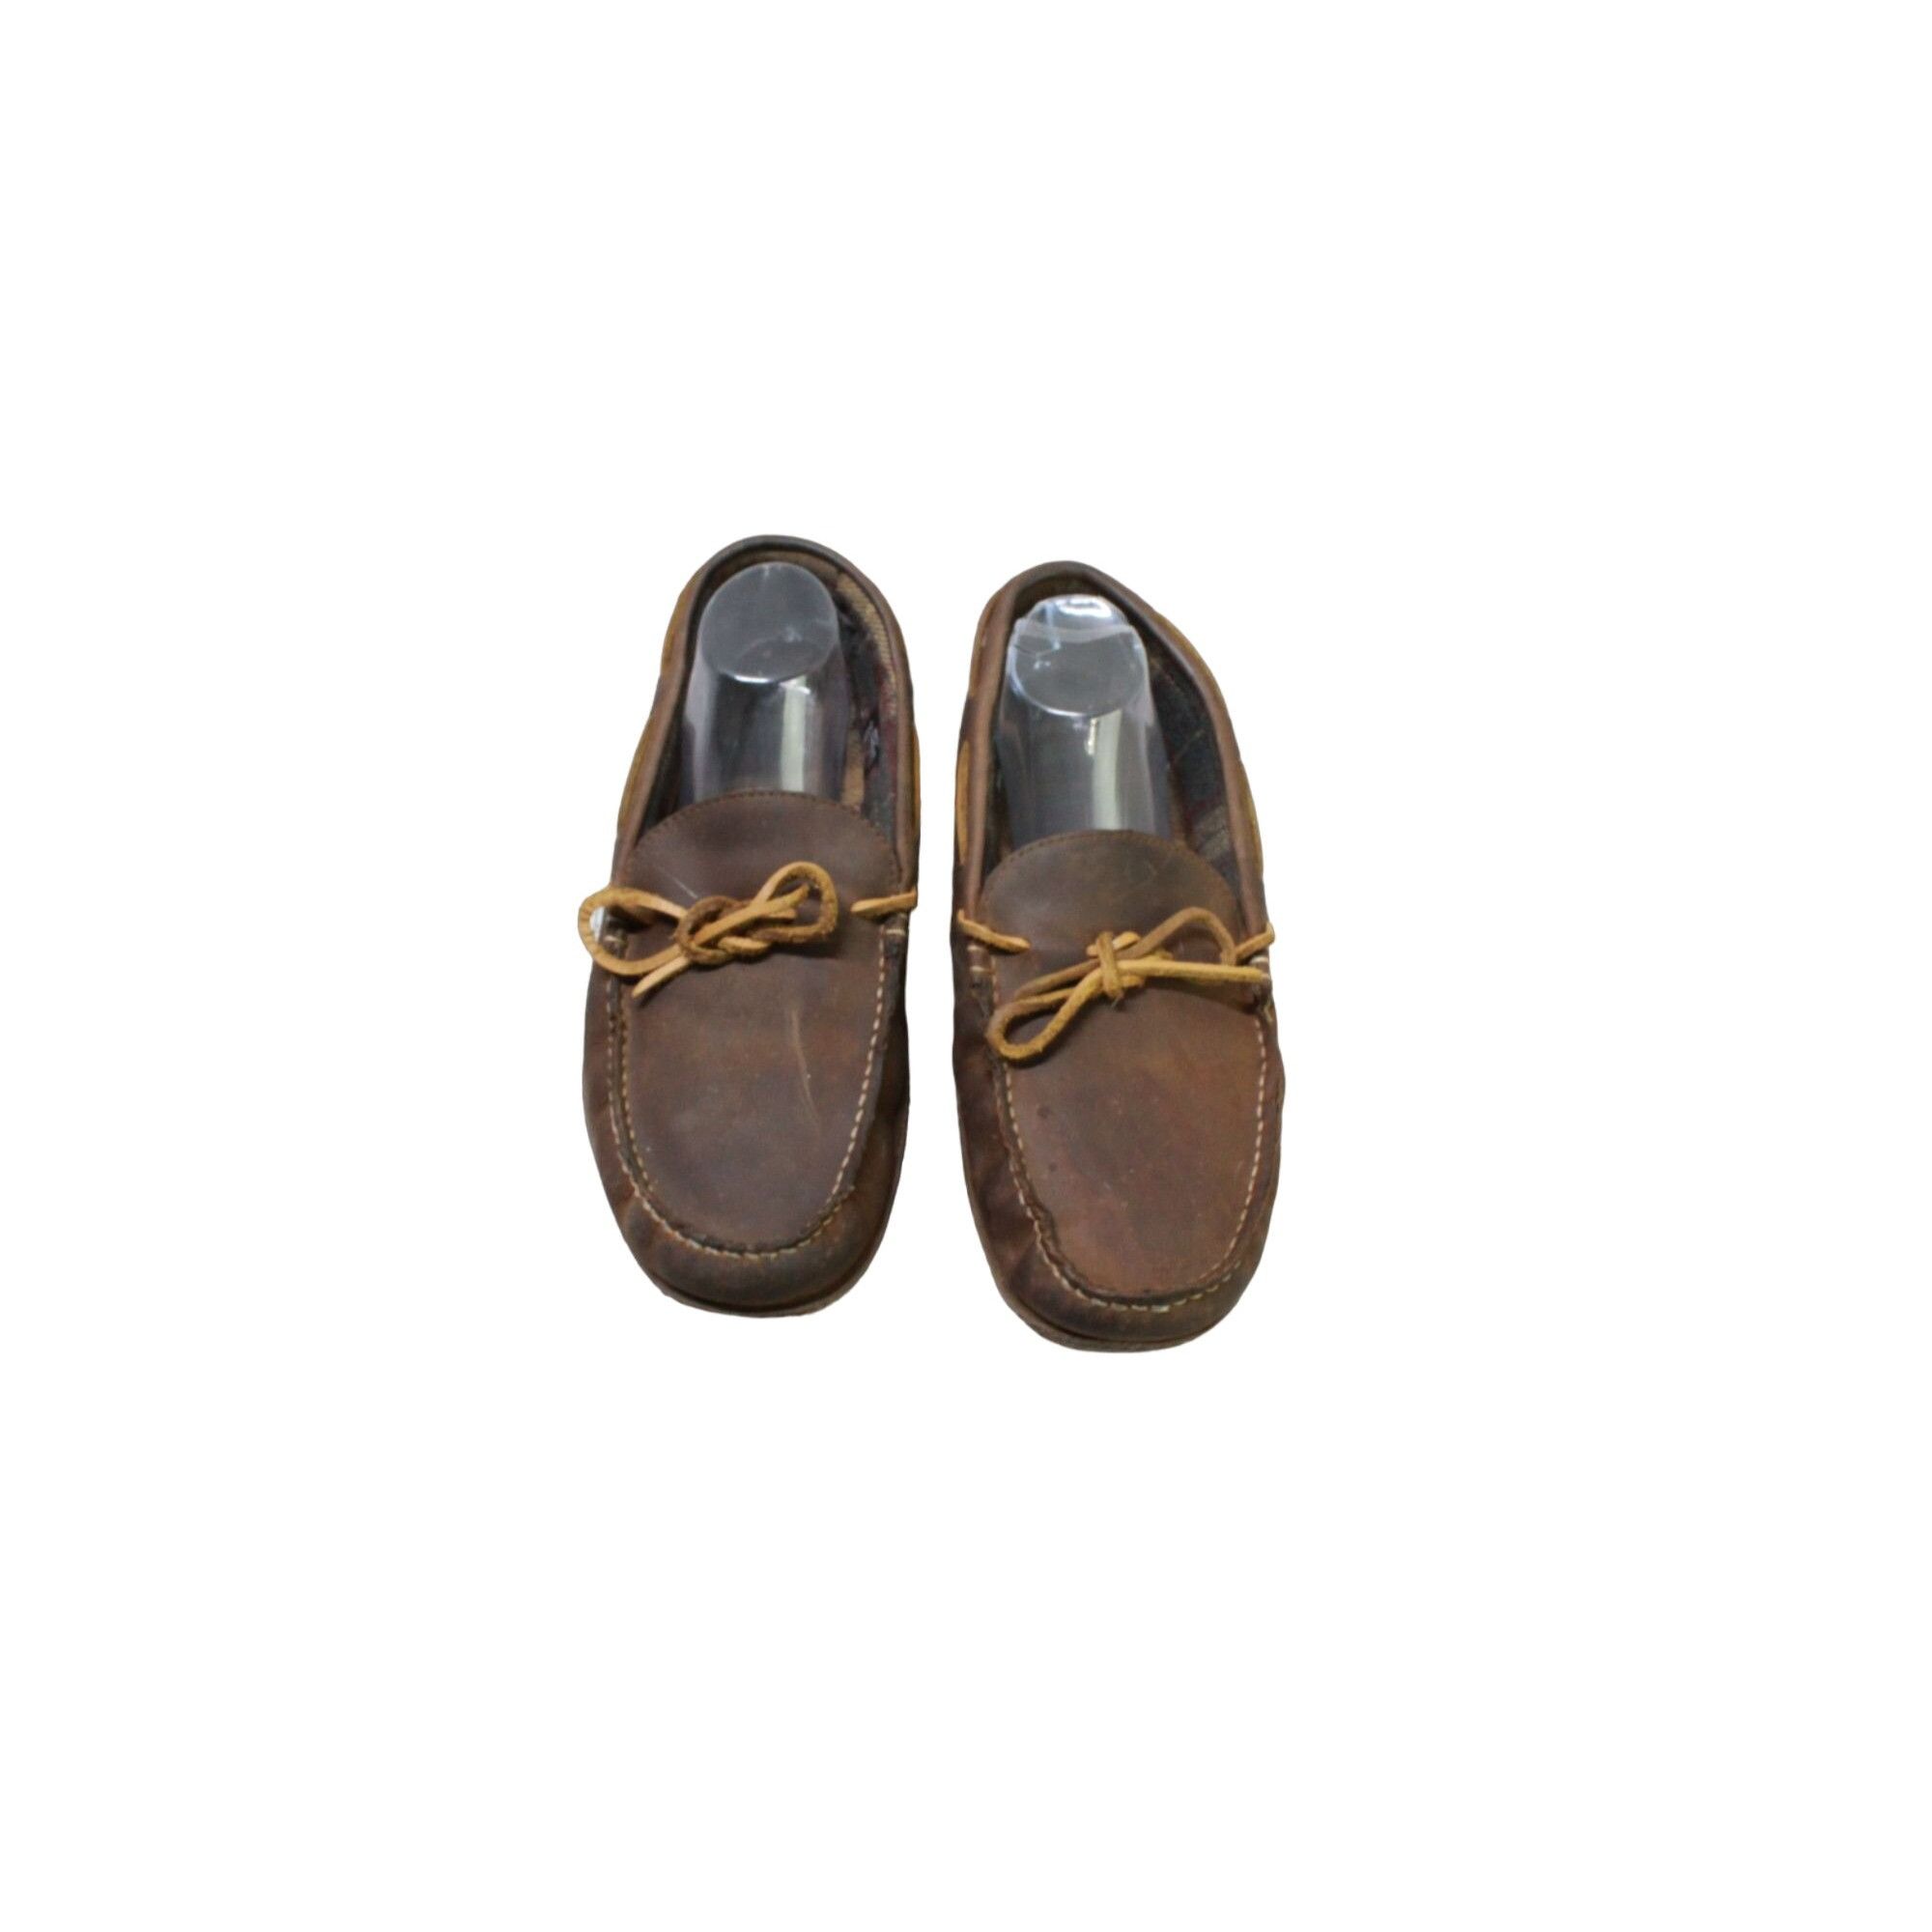 L.L. Bean LL Bean Men's Brown Leather Flannel-Lined Handsewn Slippers Size US 12 / EU 45 - 1 Preview